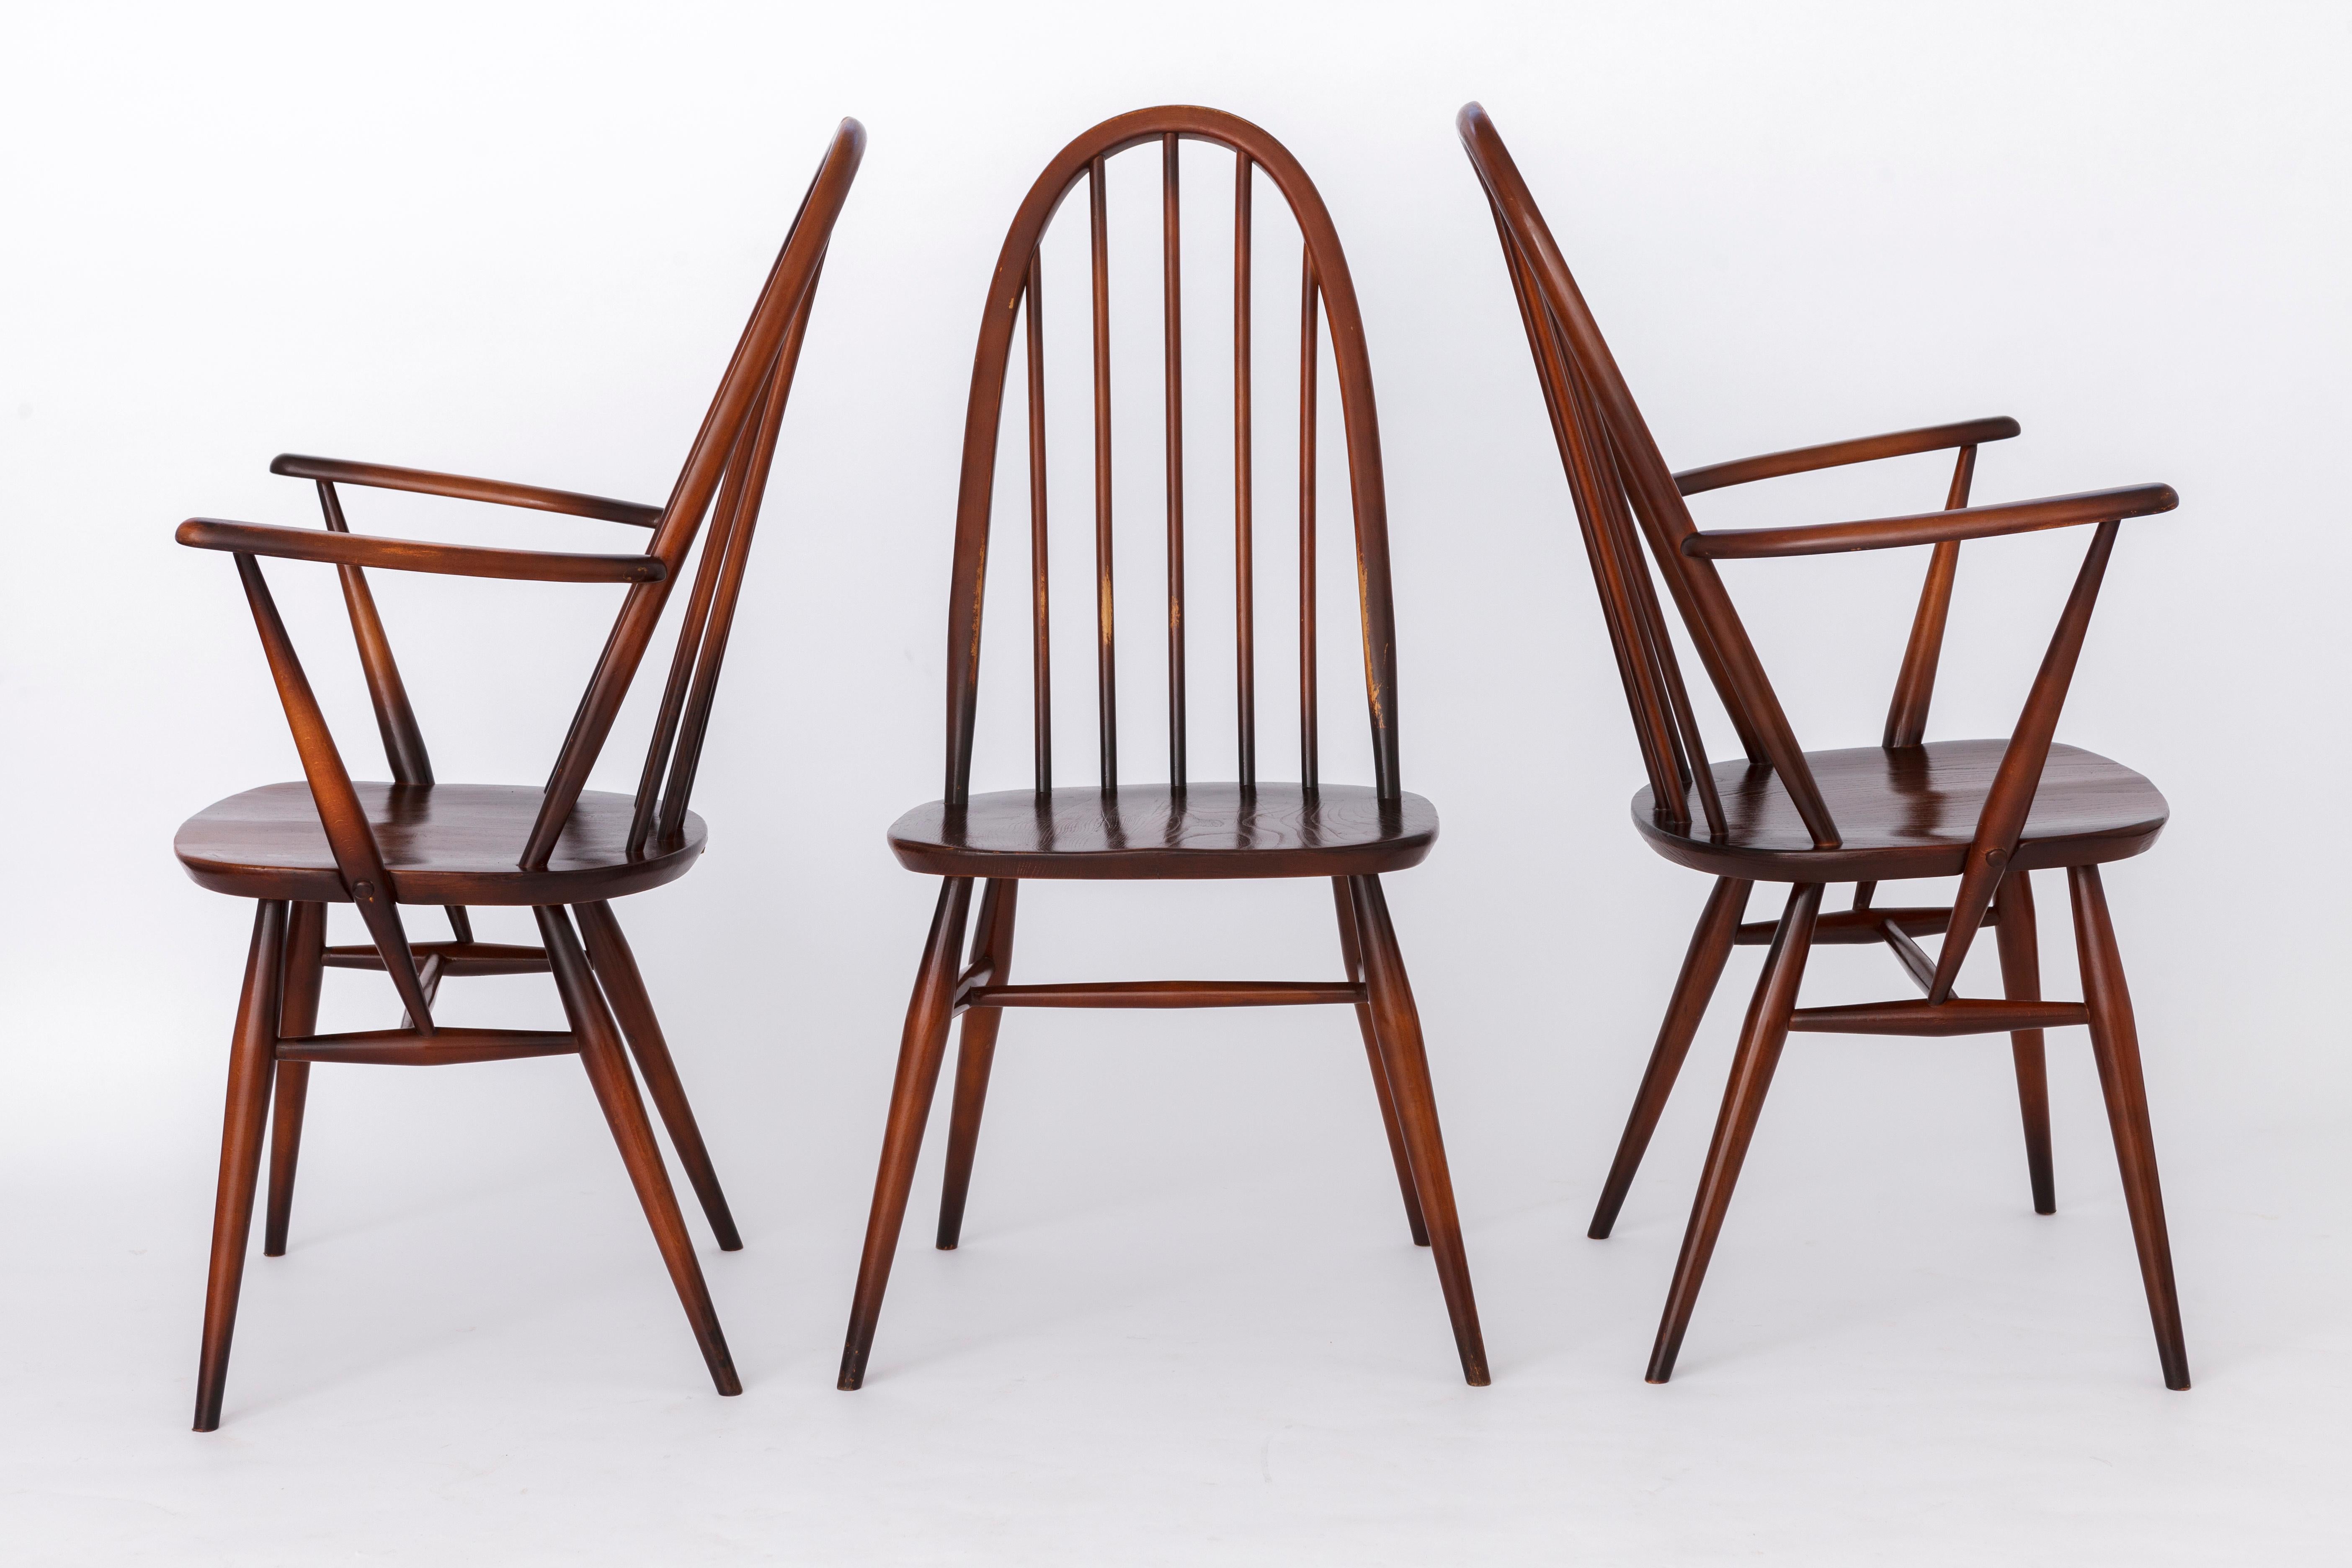 Polished Set of 6 Ercol 365 Quaker Windsor Chairs, 1960s Vintage, England For Sale